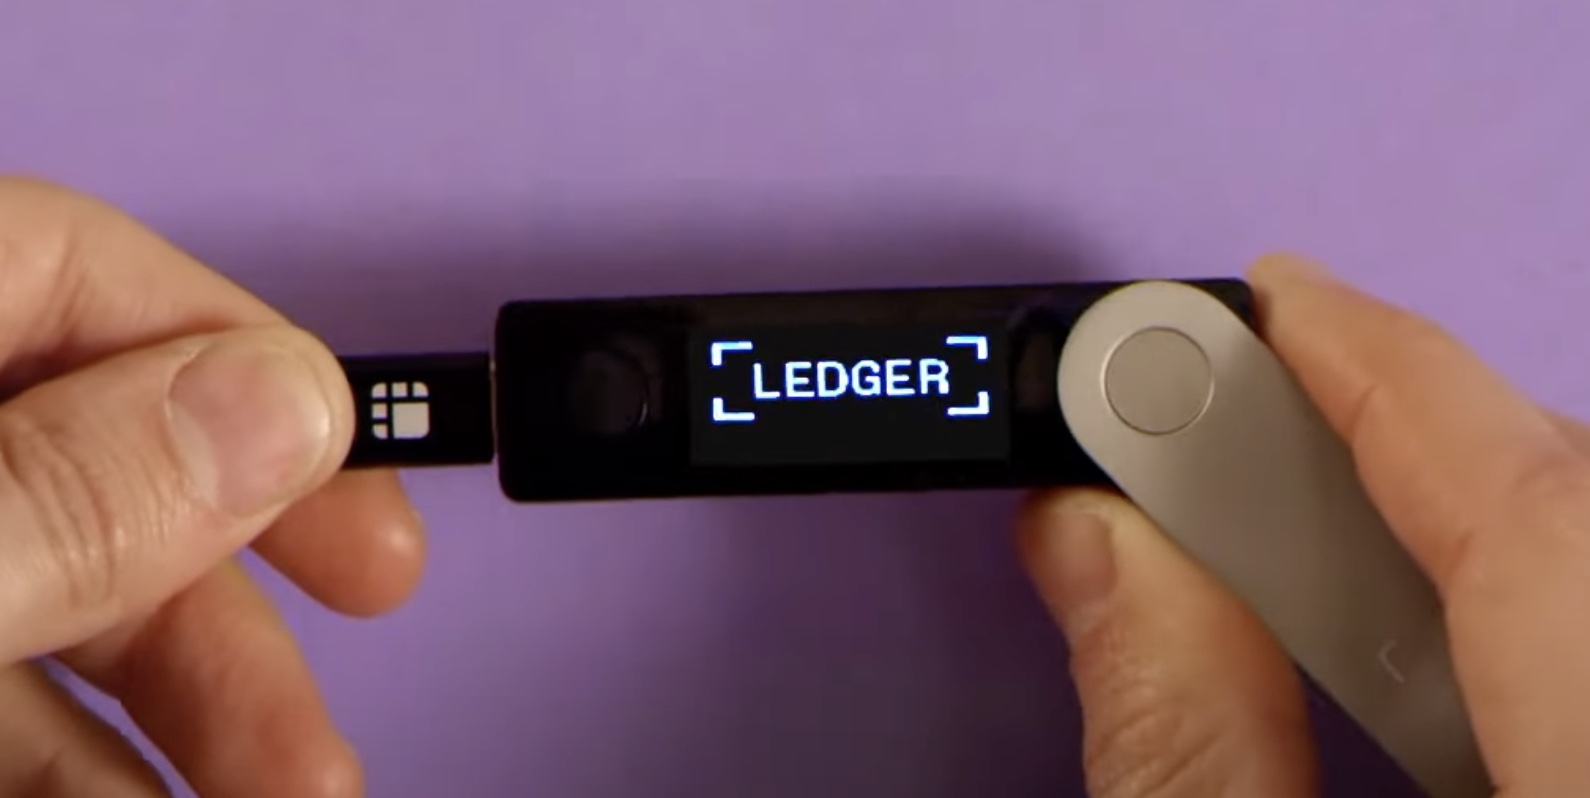 How To Check If Ledger Nano X Is Genuine | CitizenSide